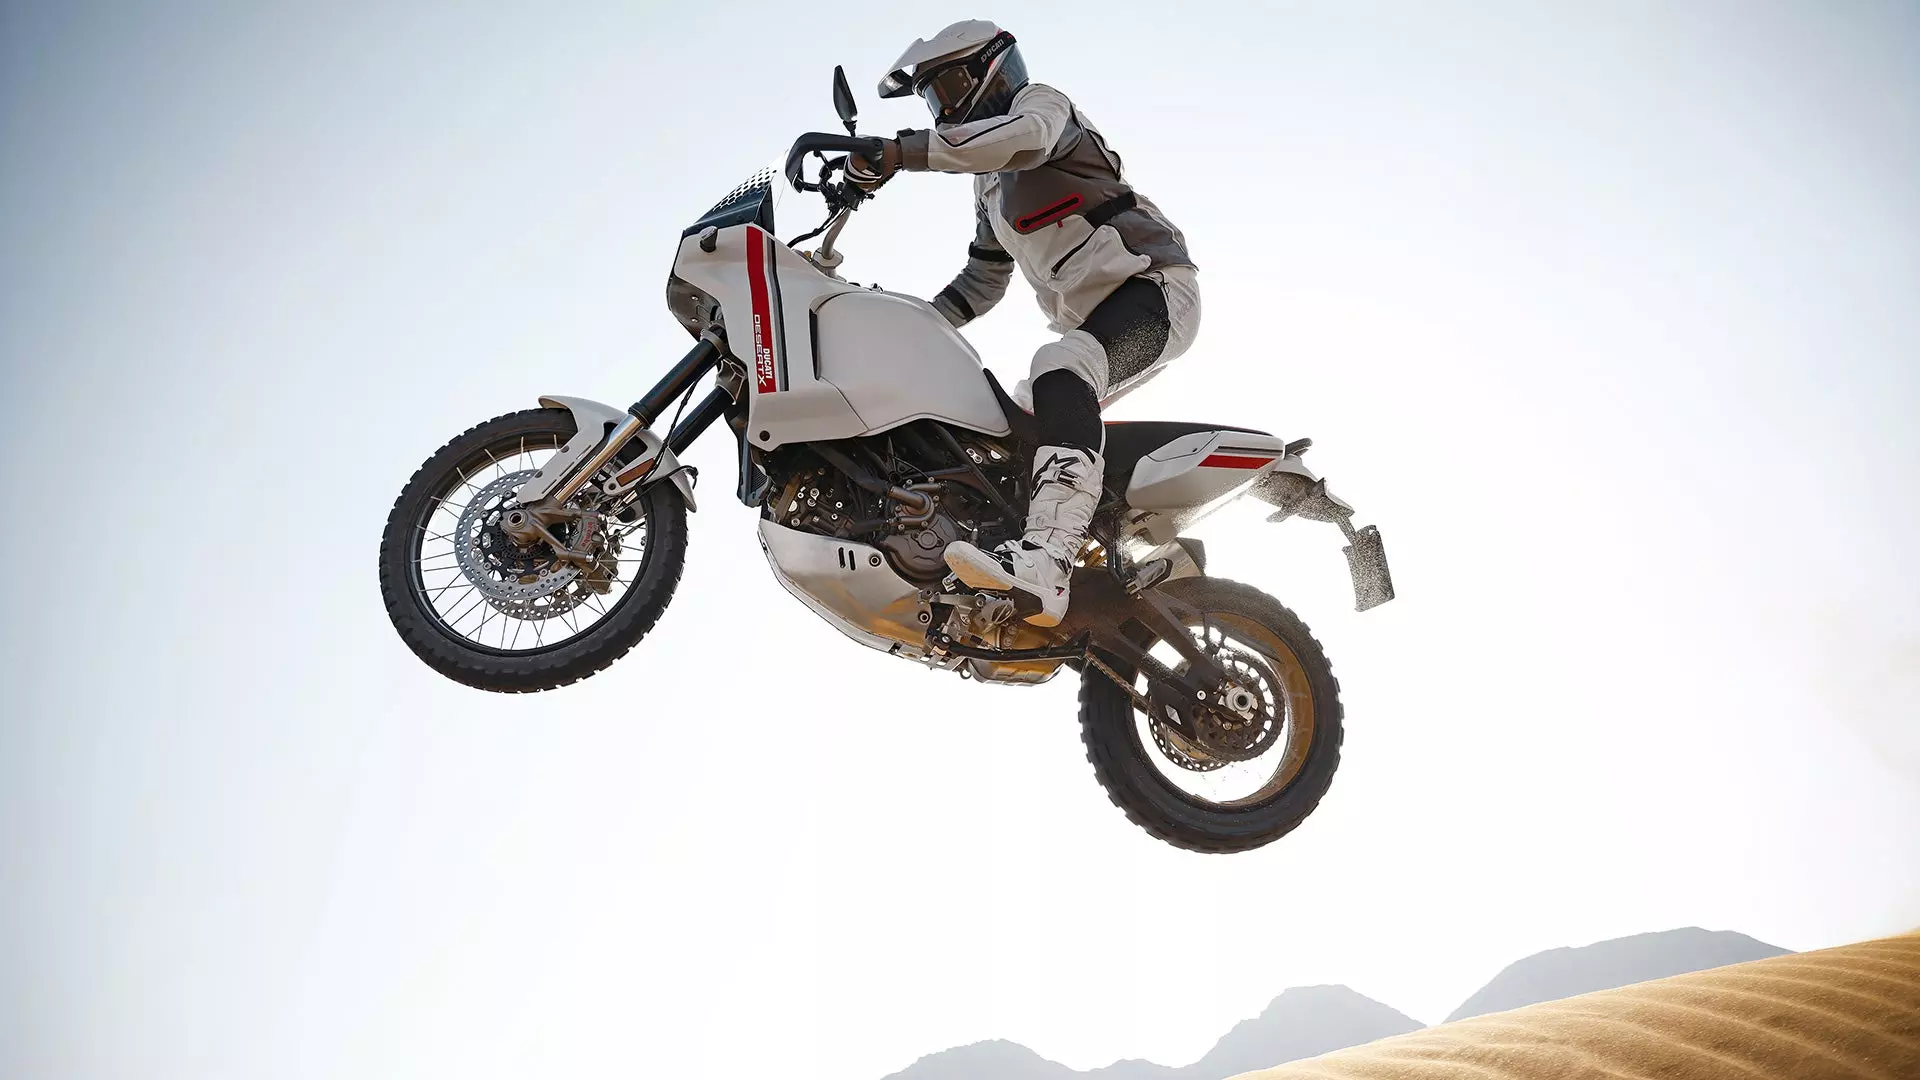 The Ducati DesertX Is a Stylish Adventure Bike Ready for Dirt and Sand | Autance